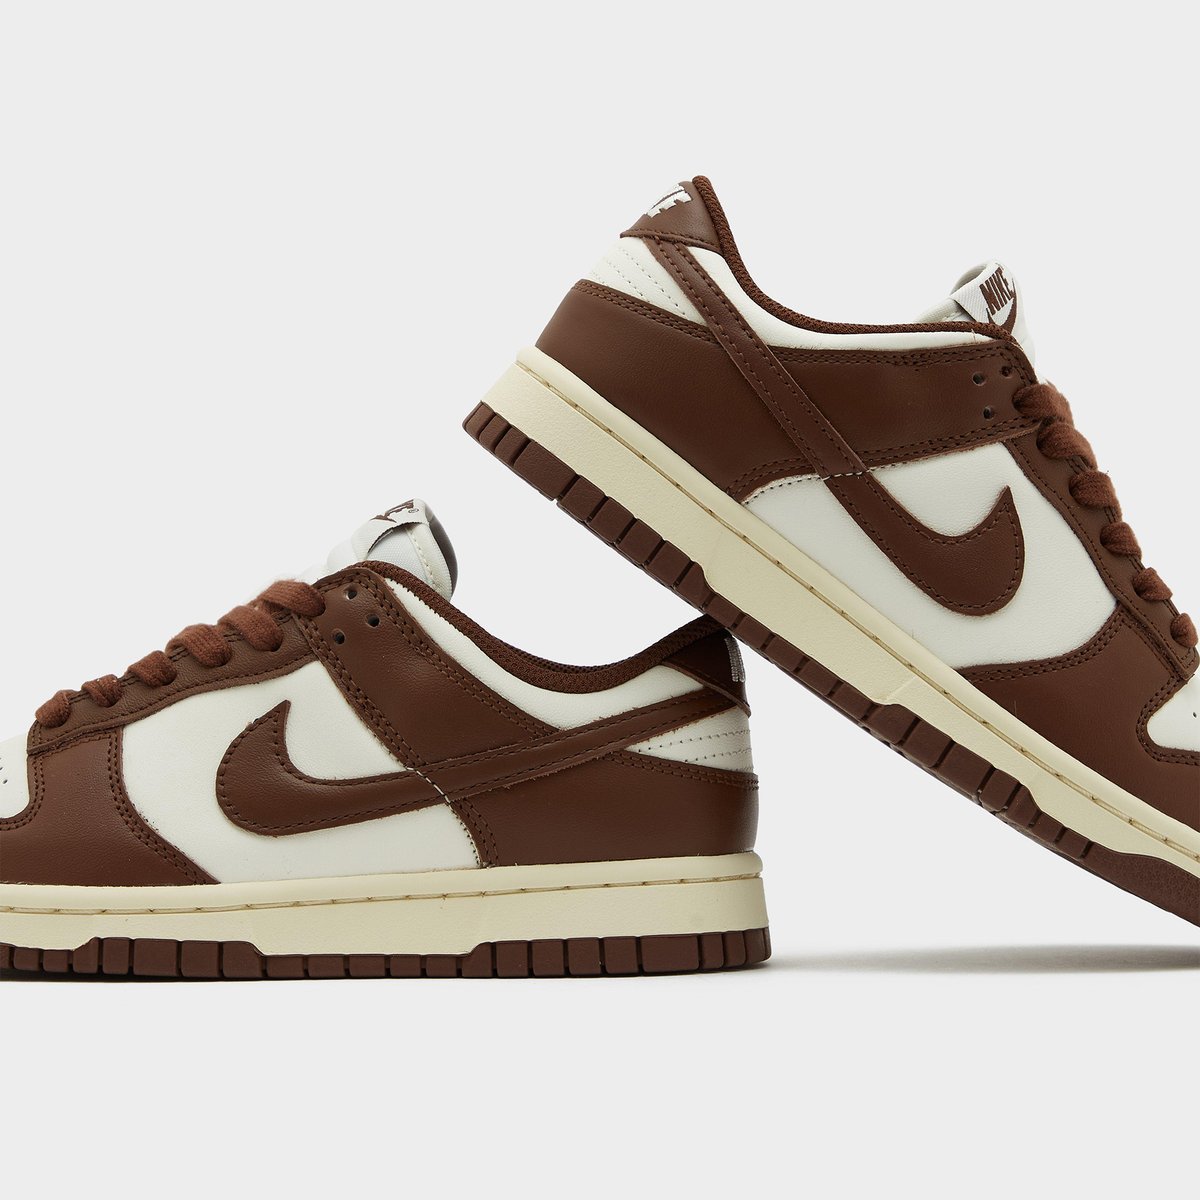 New Looks // Nike Dunk Low “Cacao Wow” 🍫

SEE MORE: bit.ly/3W3HdWb